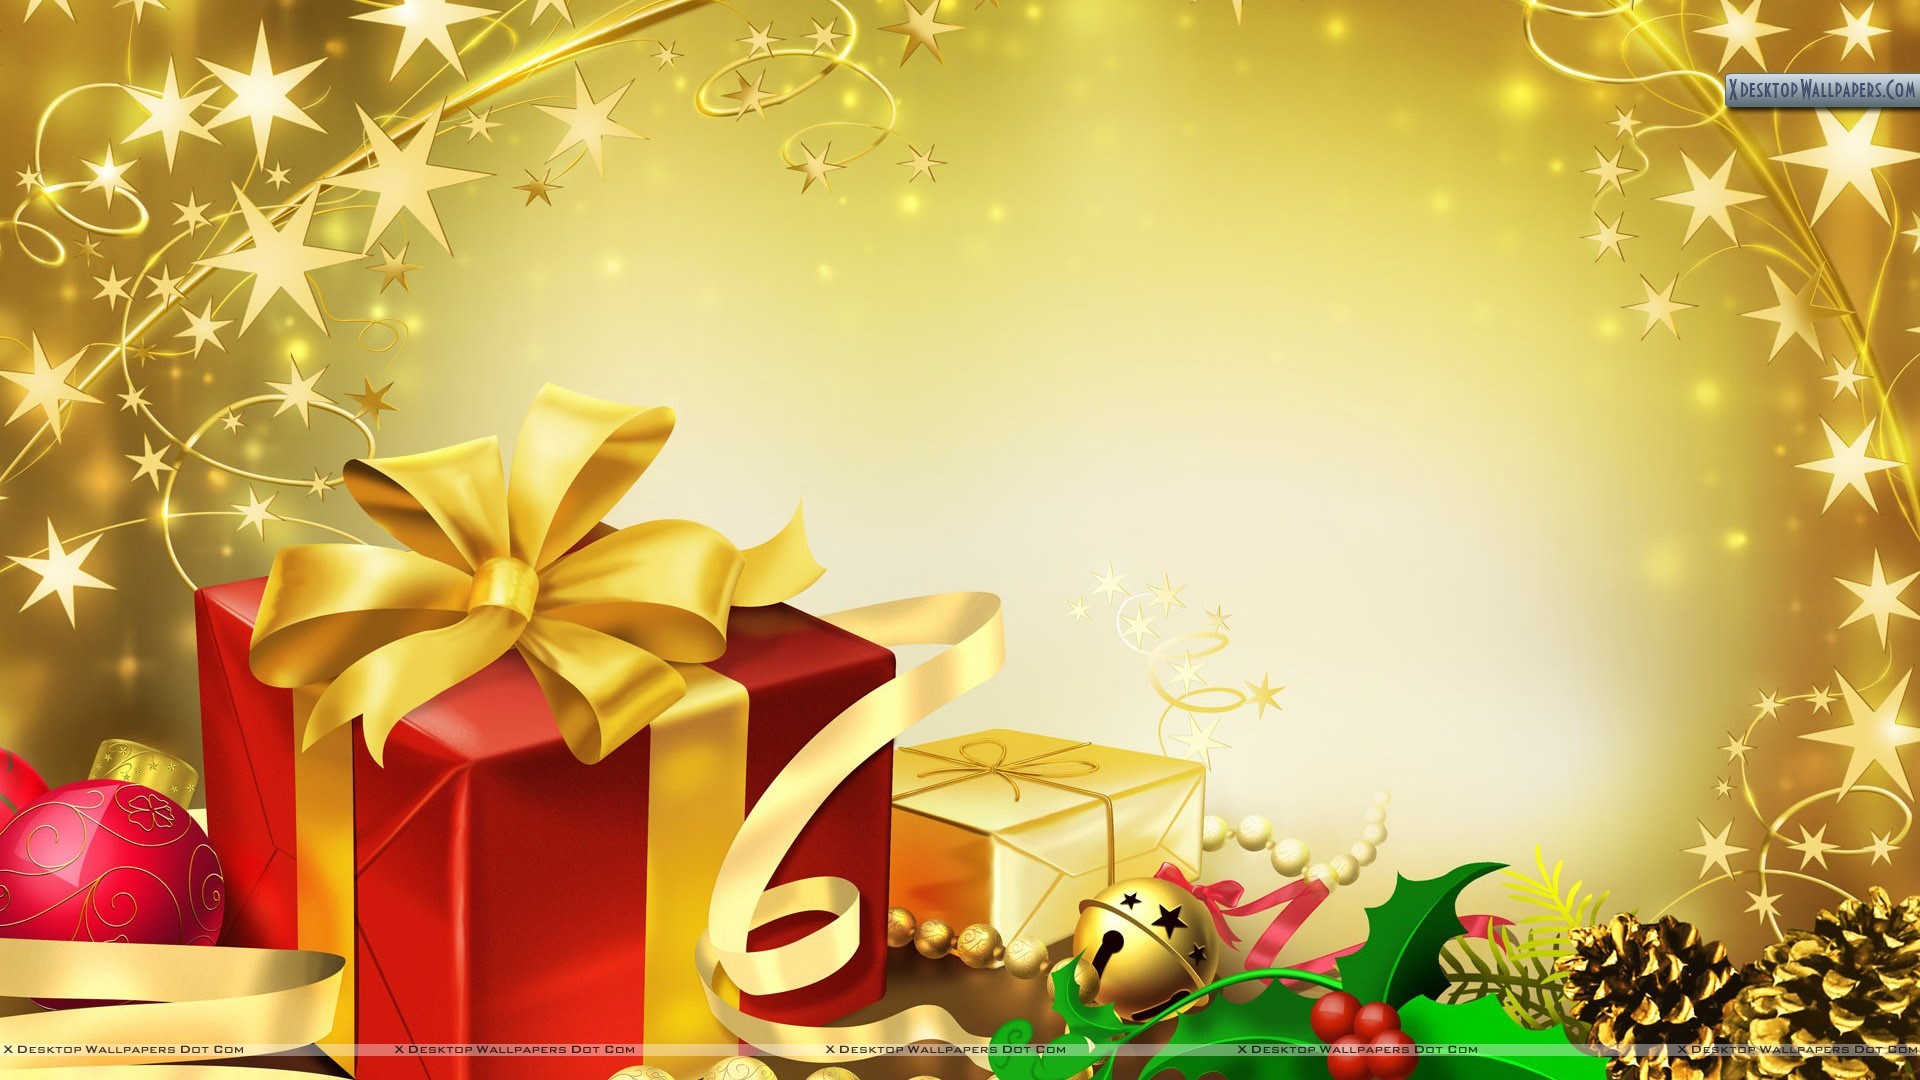 1920x1080 You are viewing wallpaper titled "Gifts Packets At Christmas Eve" ...